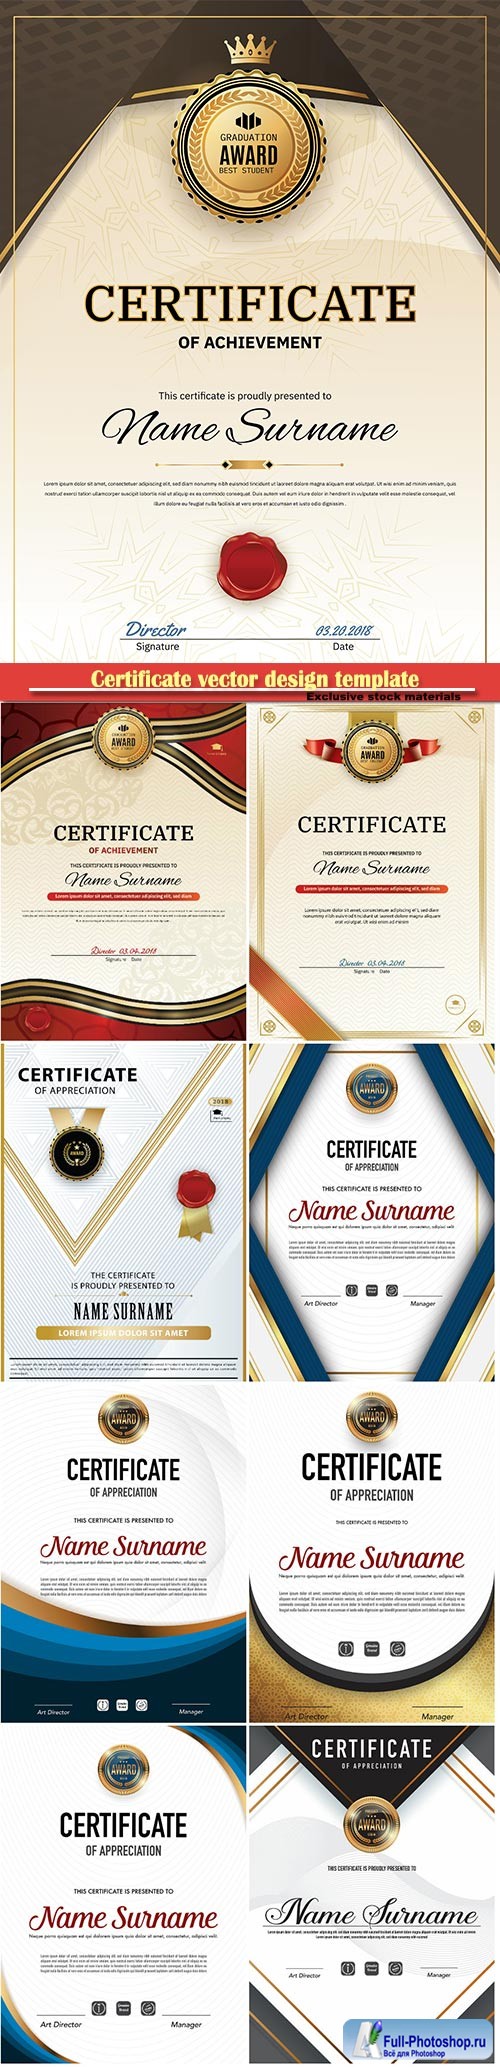 Certificate and vector diploma design template # 66